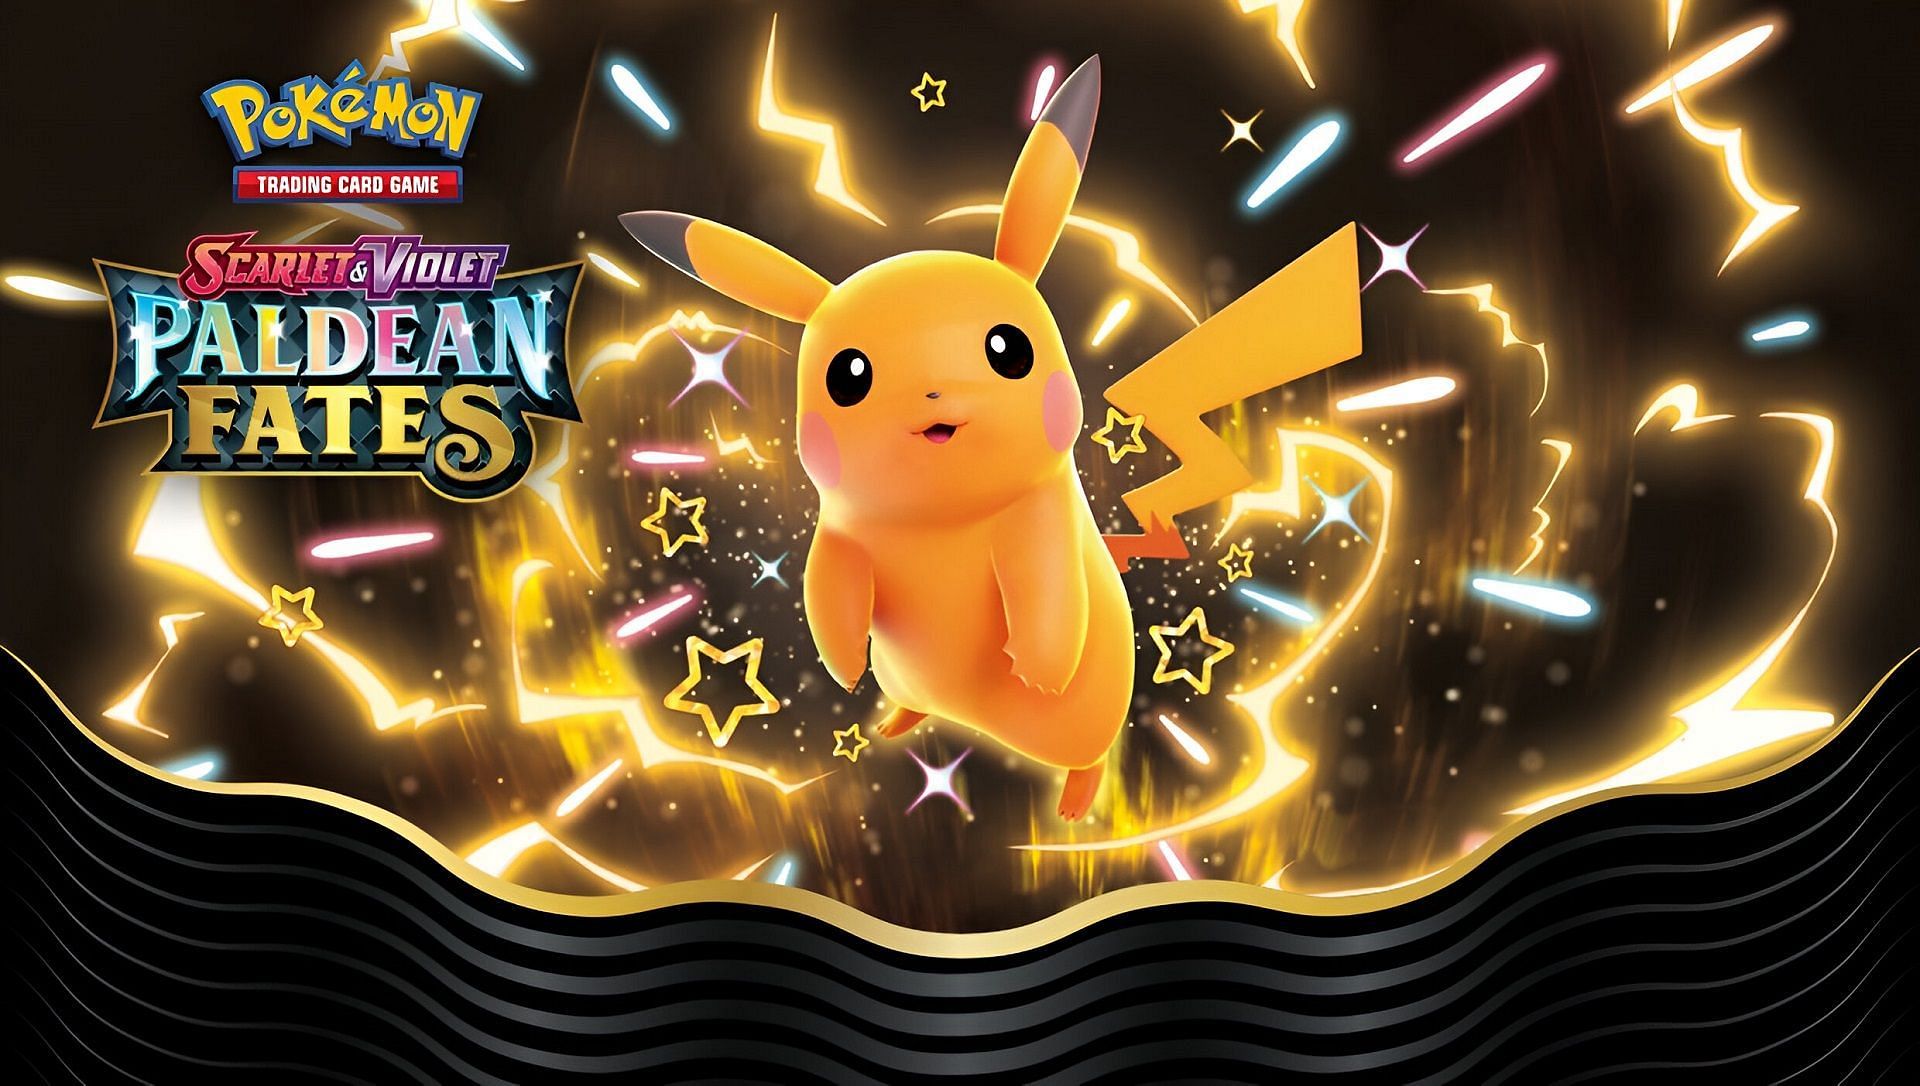 Shiny Pikachu is one of many shiny cards featured in the Pokemon TCG&#039;s Paldean Fates expansion (Image via The Pokemon Company)